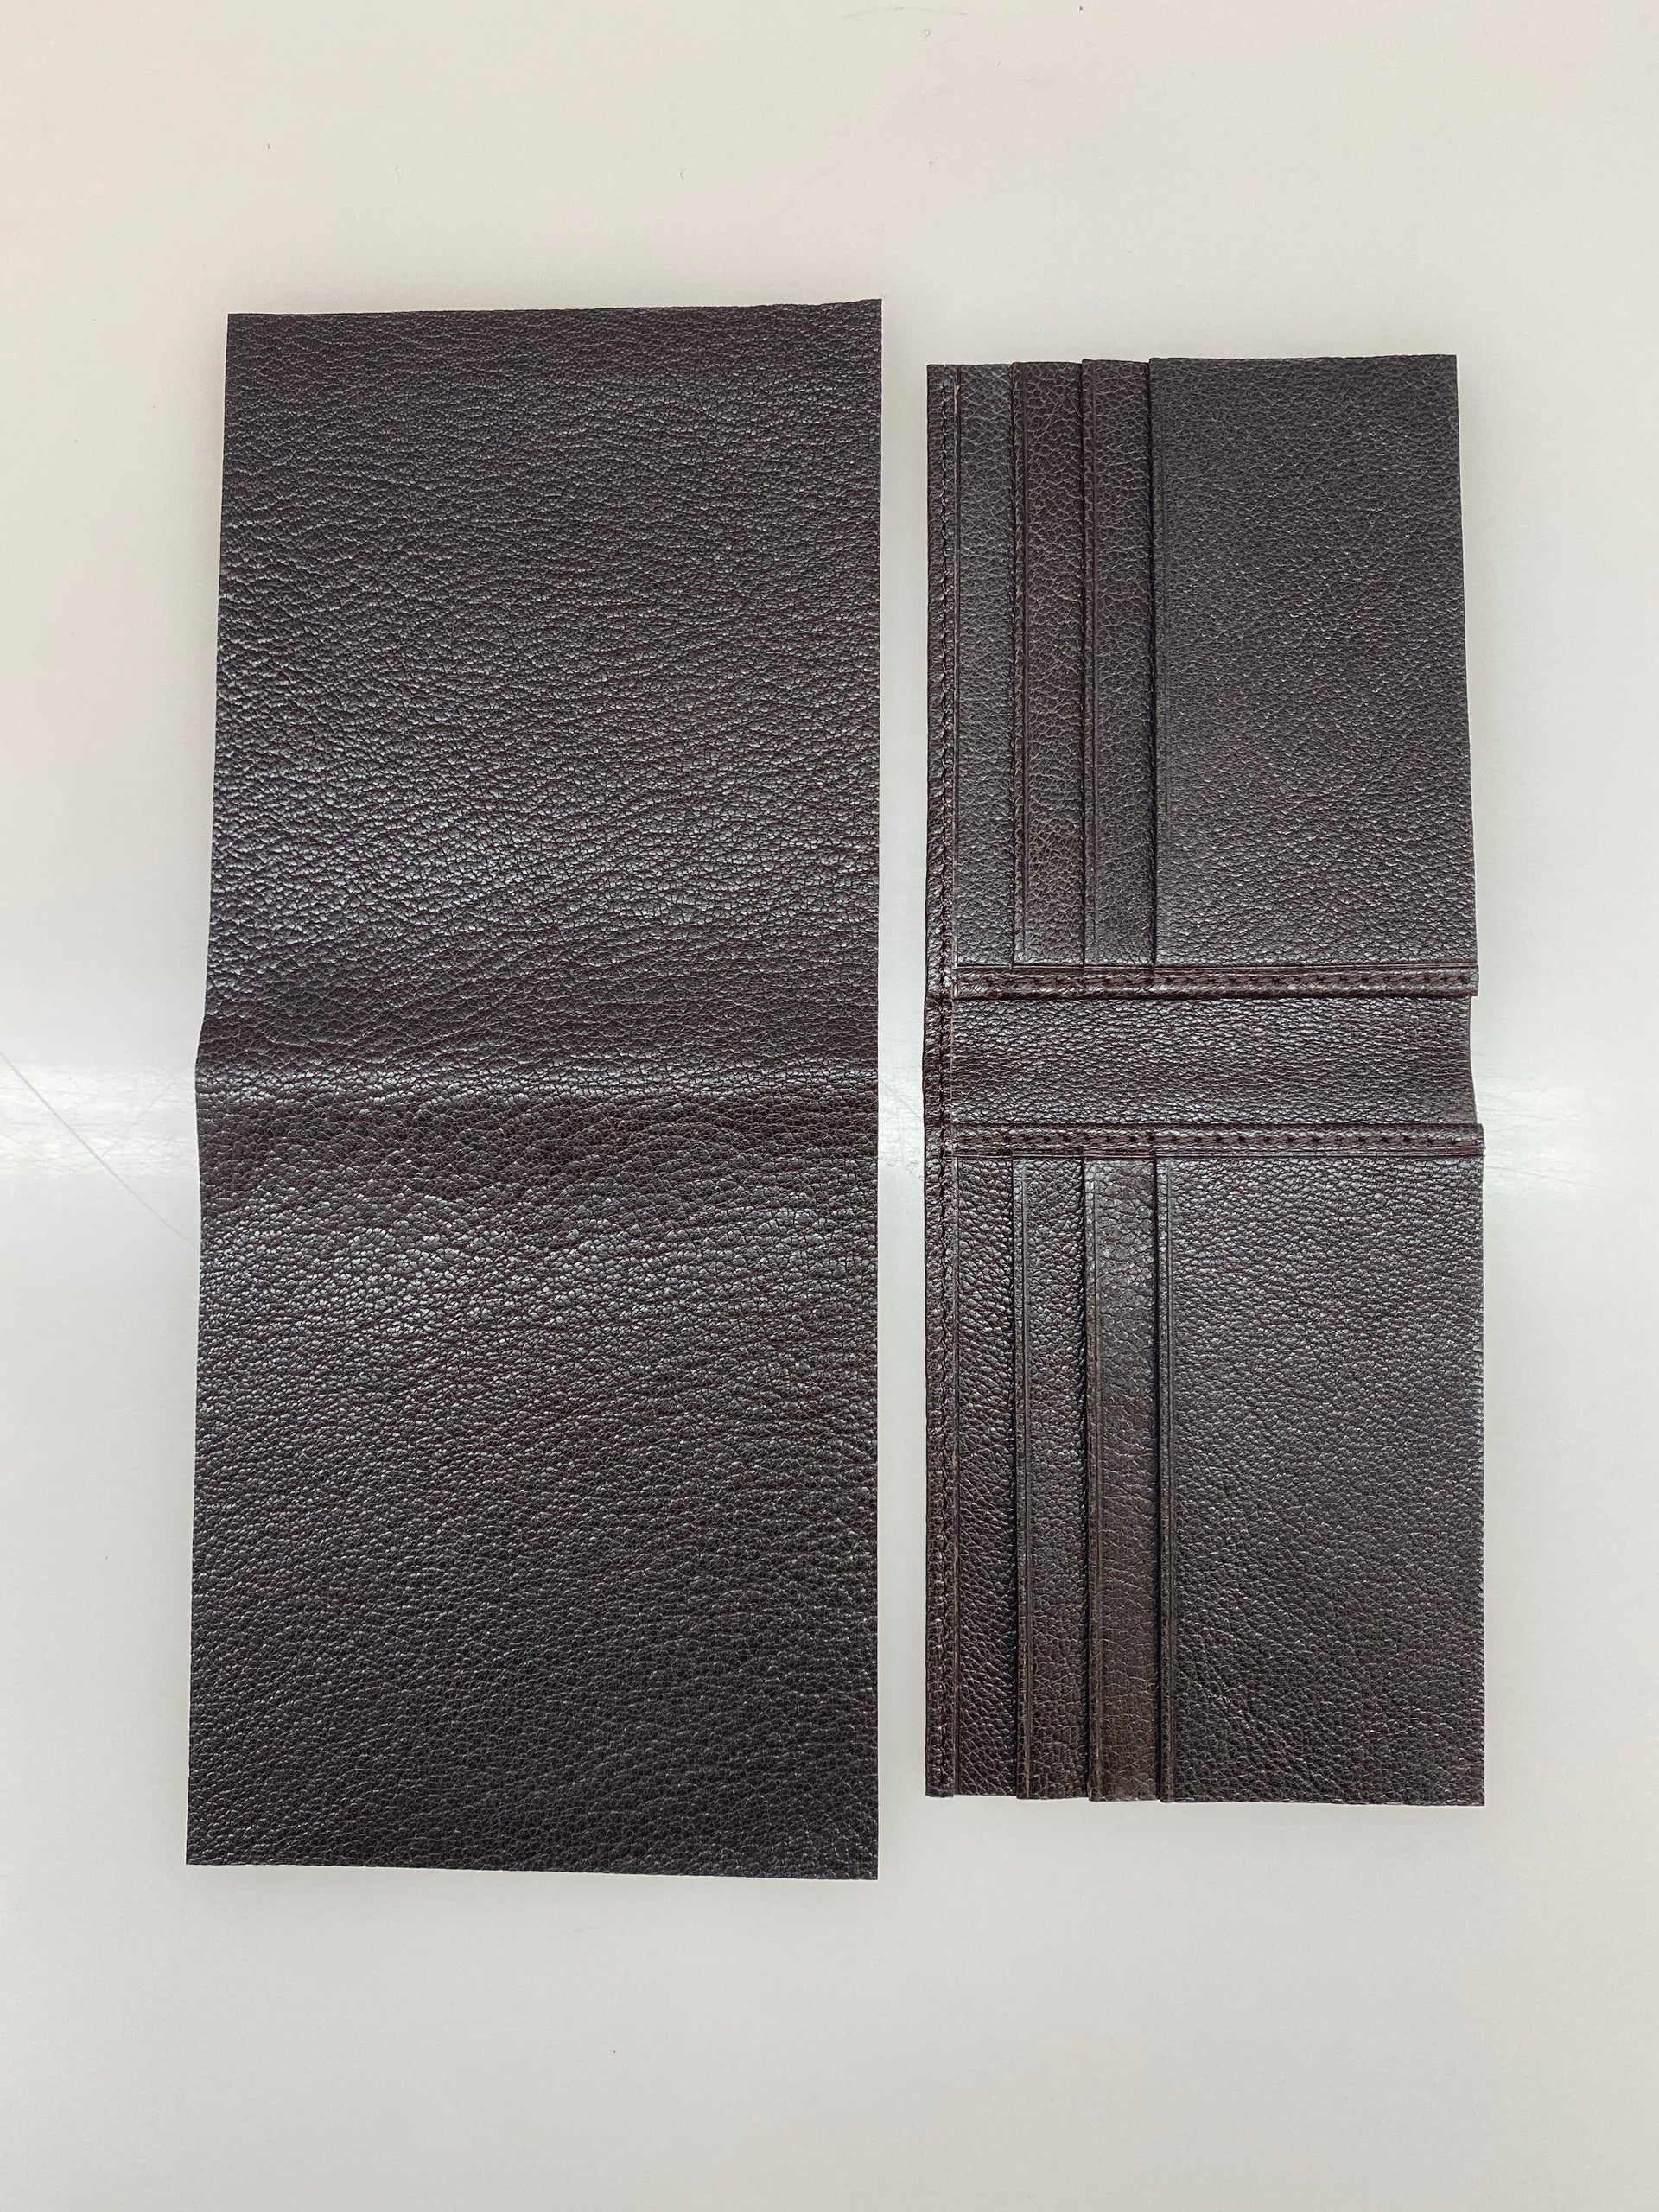 Full Grain Chèvre Leather Wallet Interiors and Precut / Skived Goat Backing